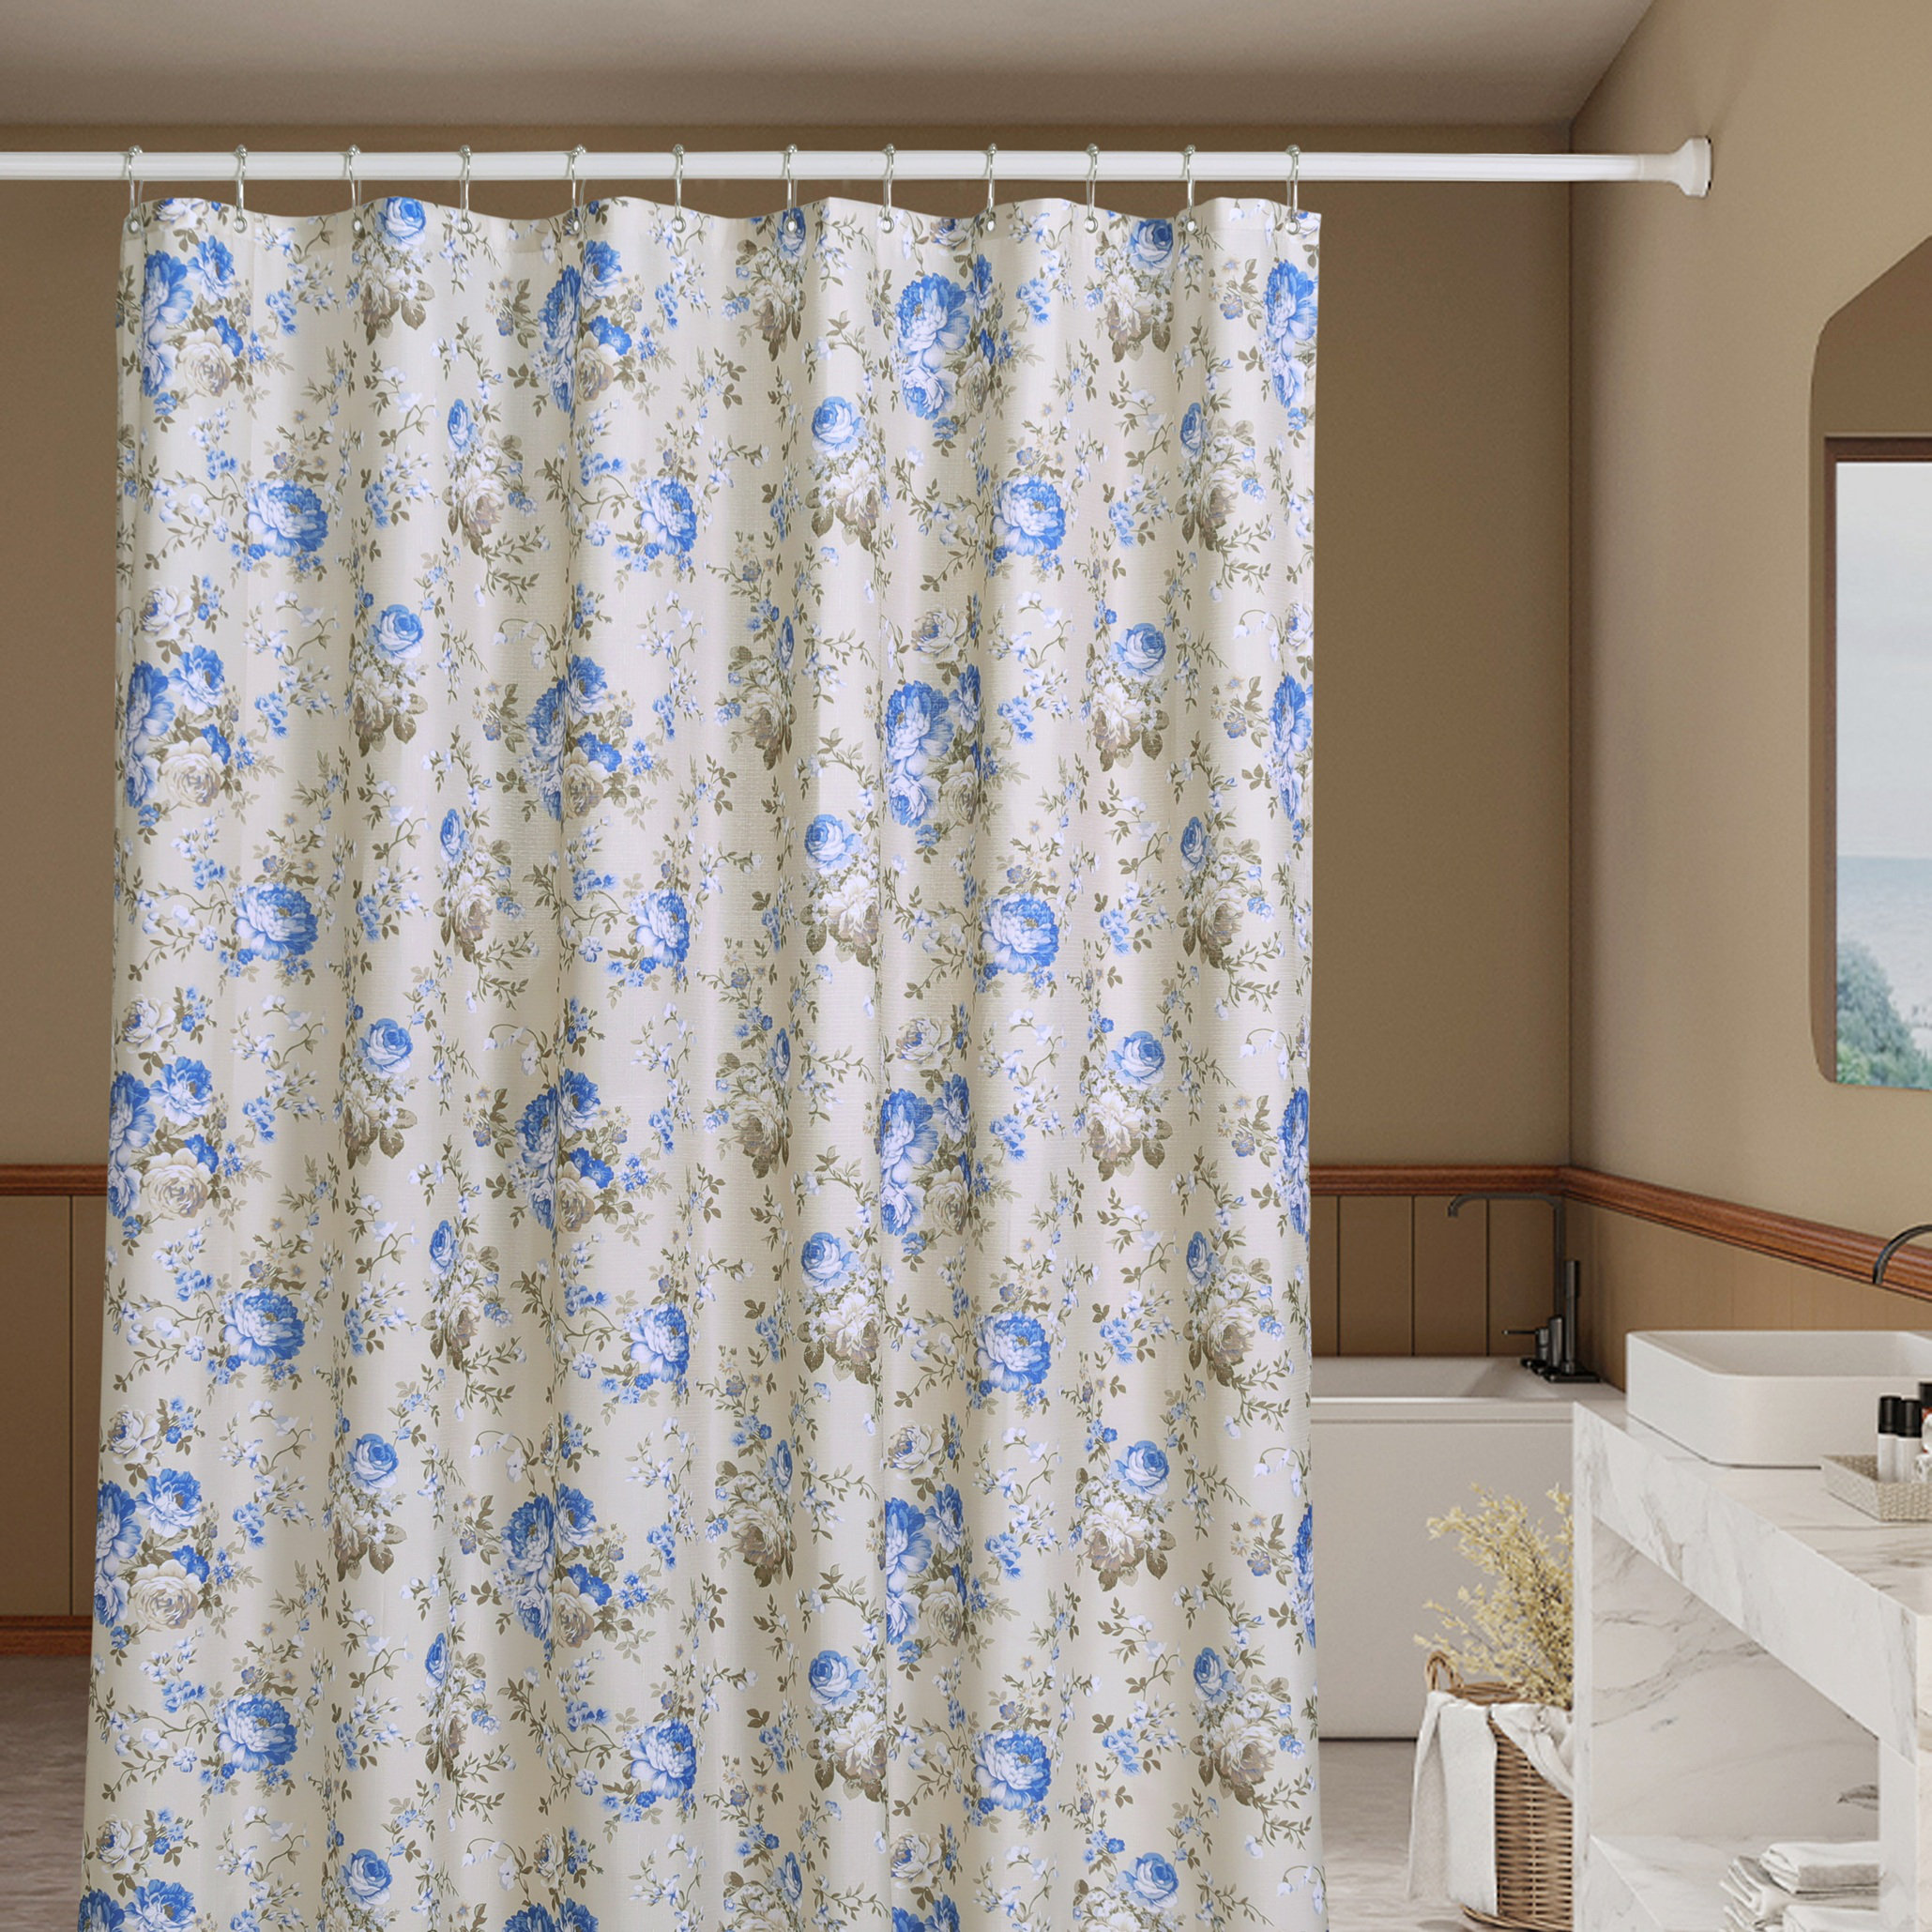 Linen Floral Shower Curtain with Hooks Included